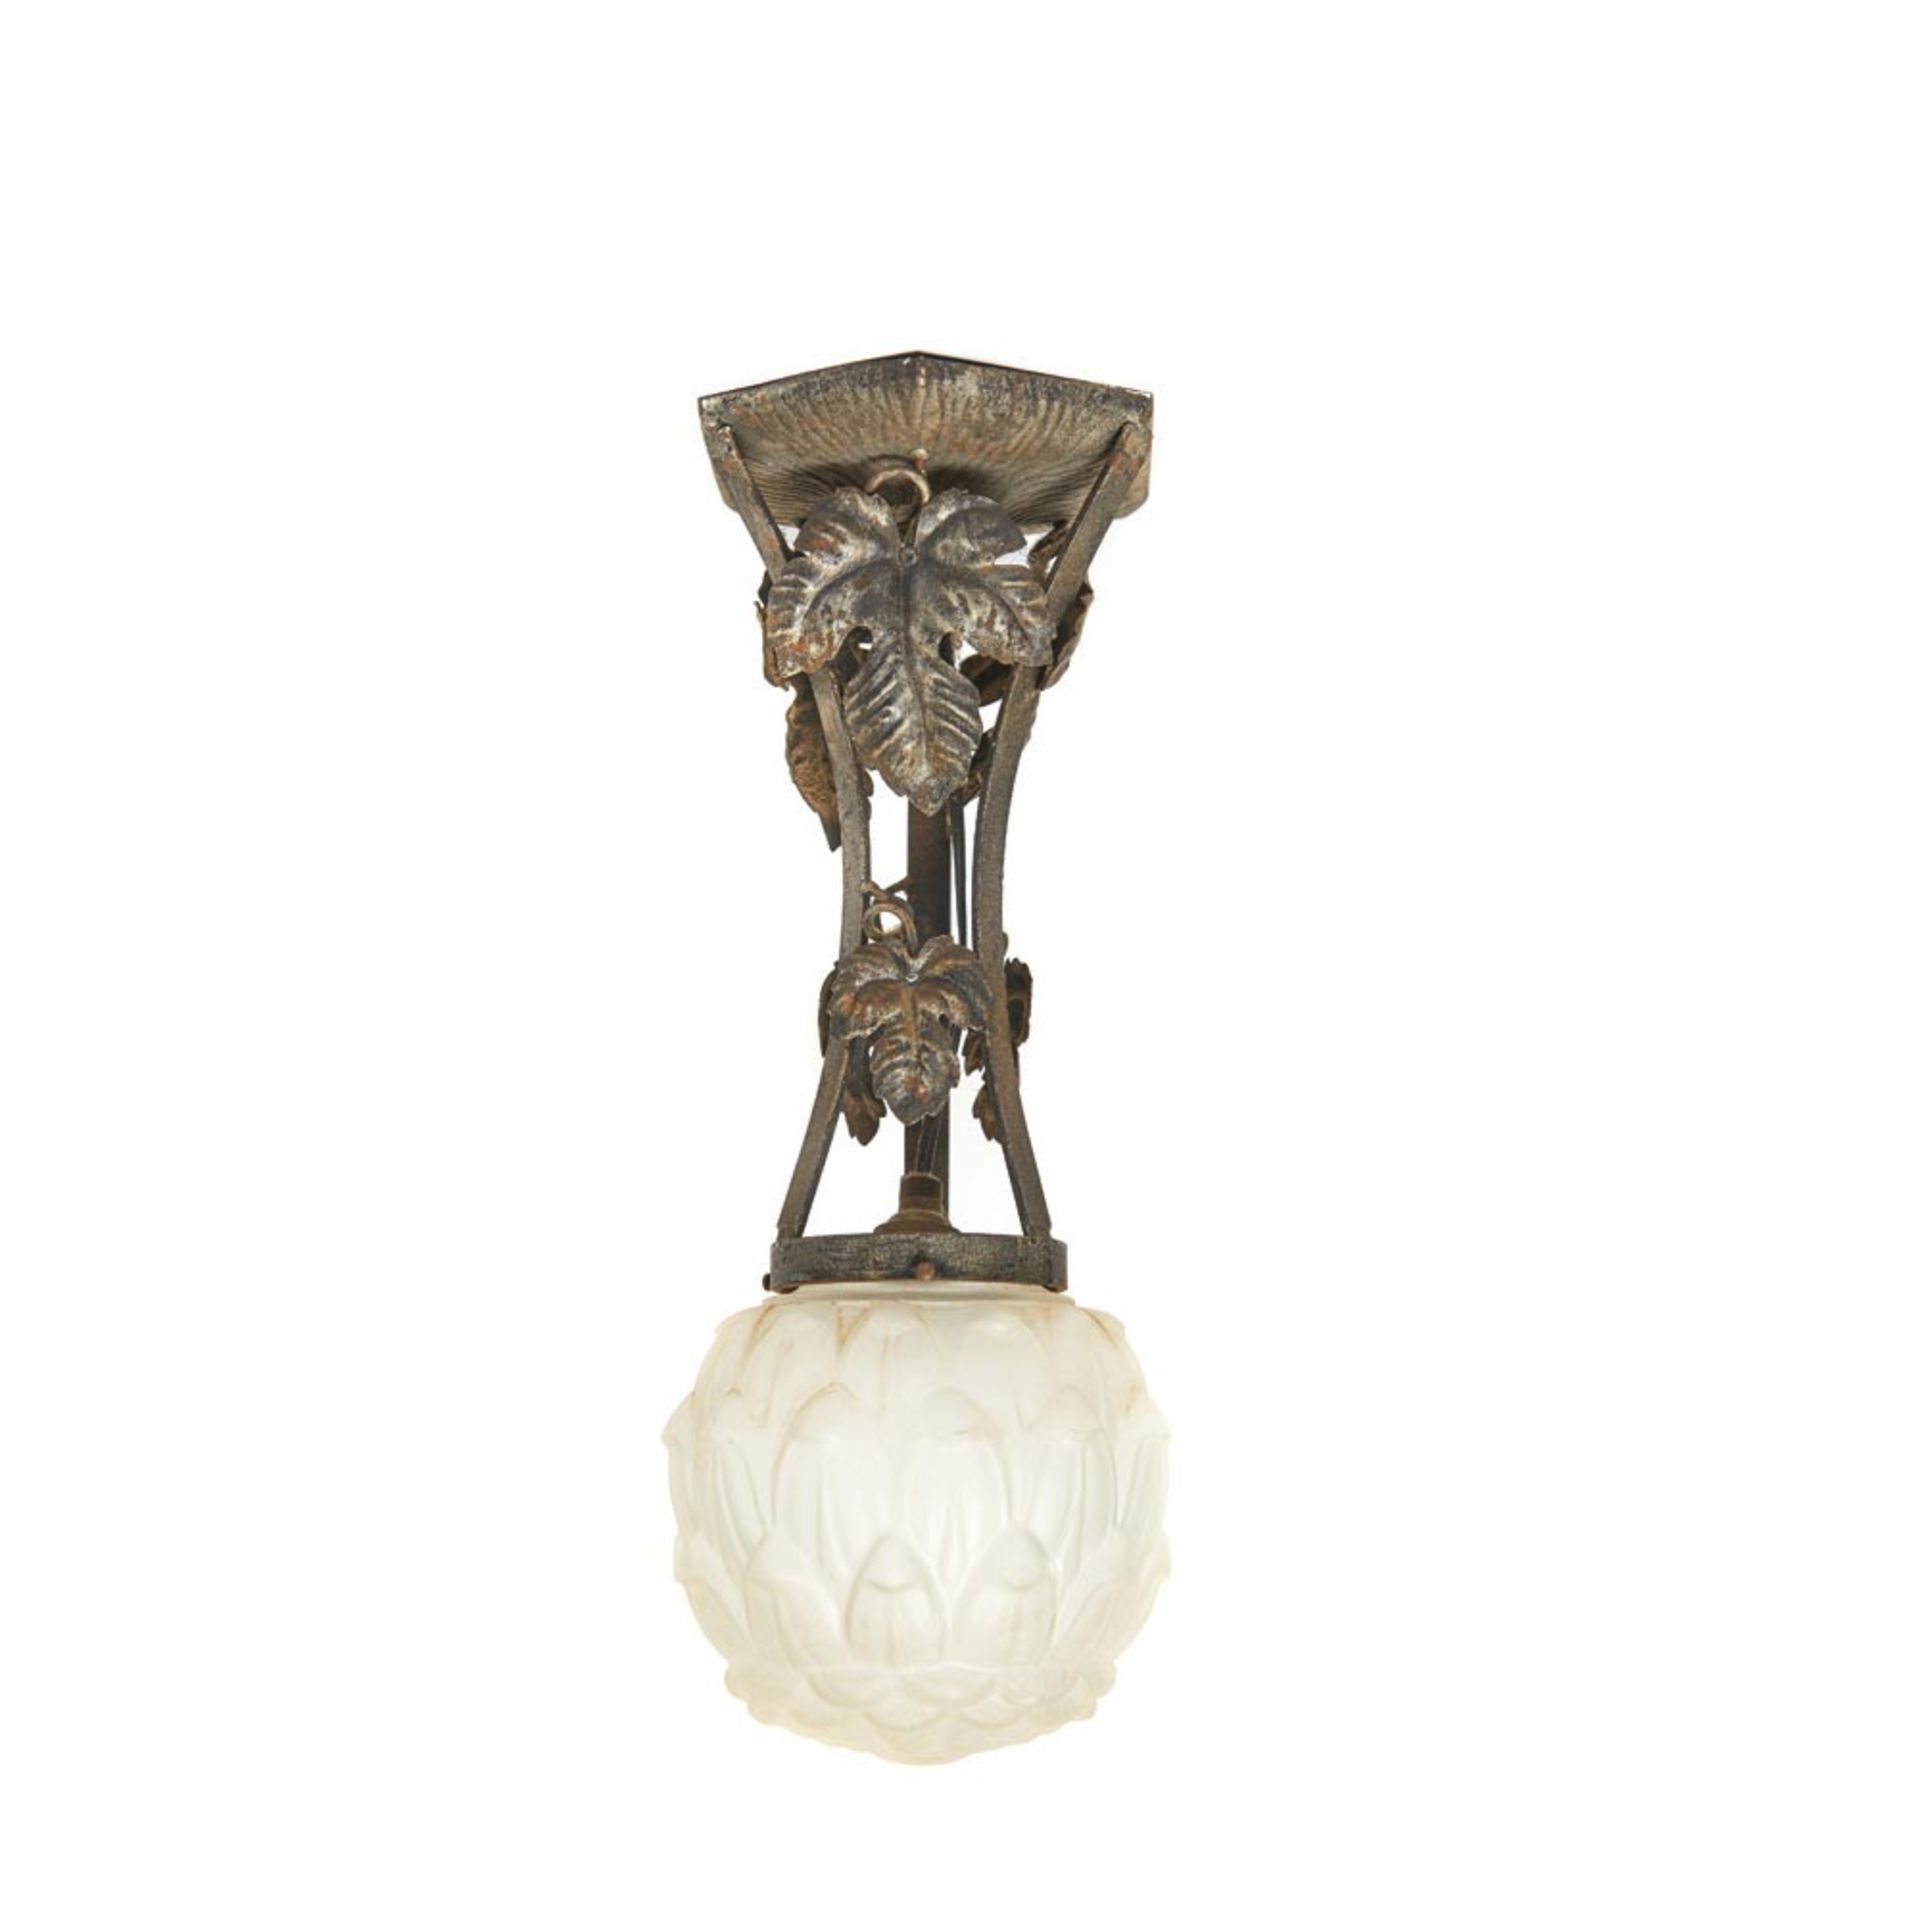 Metal and glass ceiling lamp, early 20th century